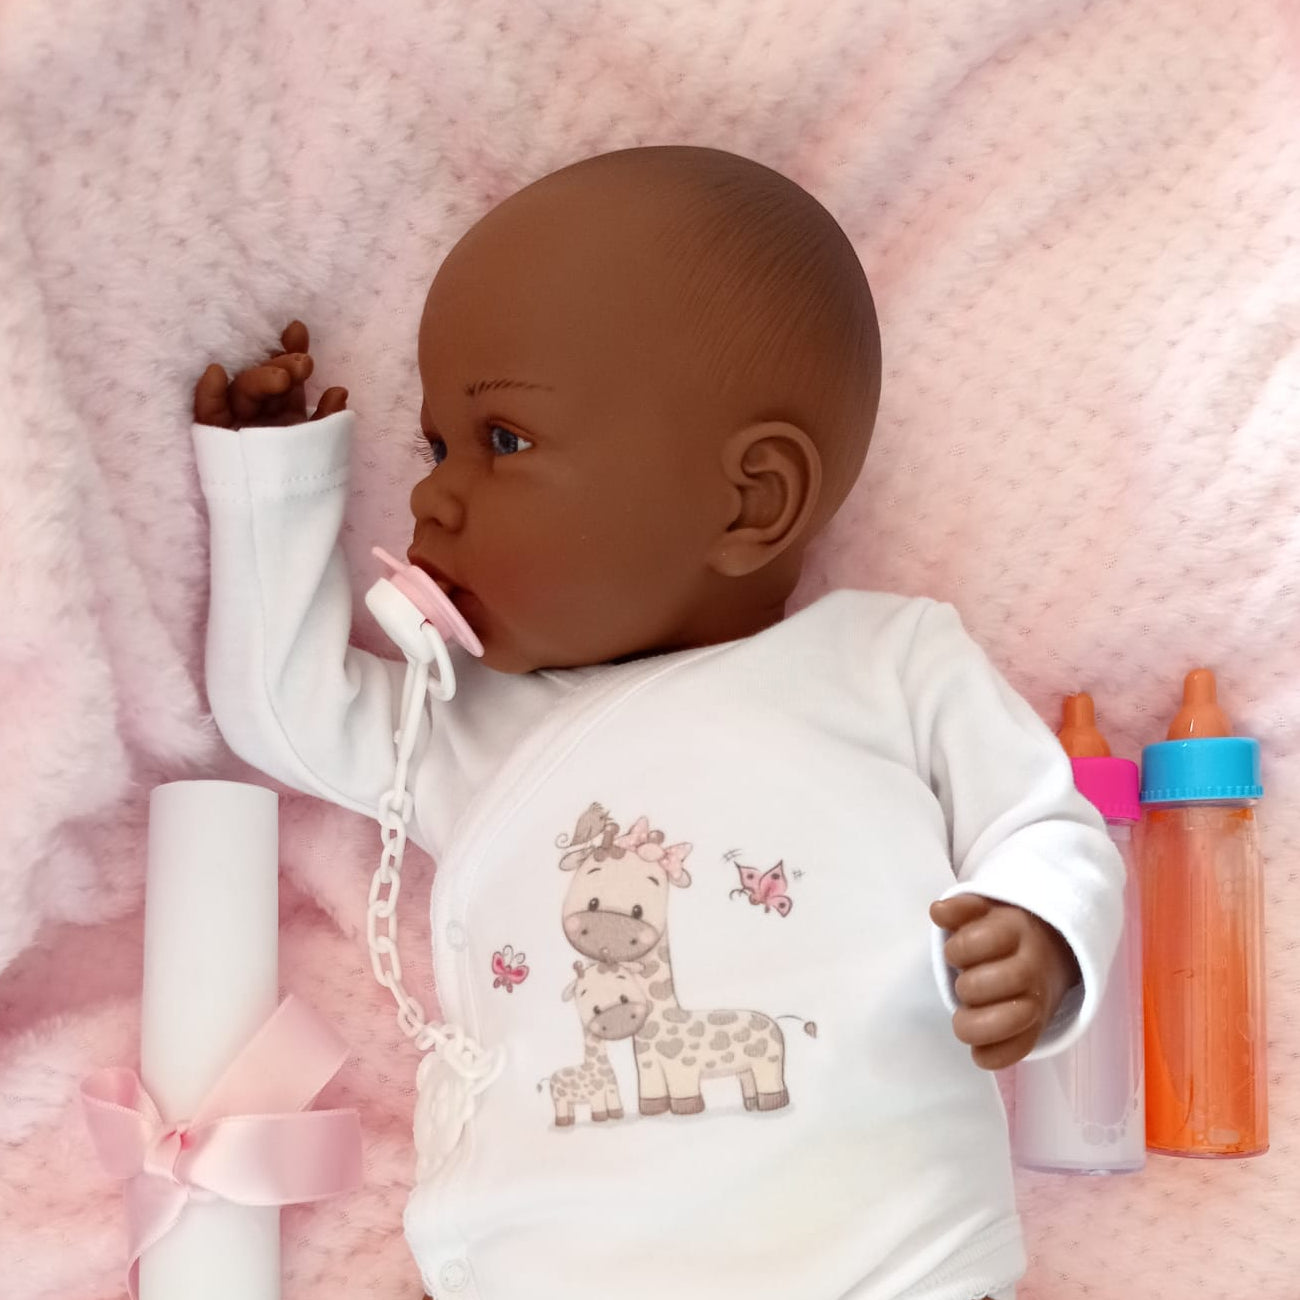 Reborn Baby Doll Reborn Africa - 48CM and 2KG - VINYL and HEAD FALL EFFECT